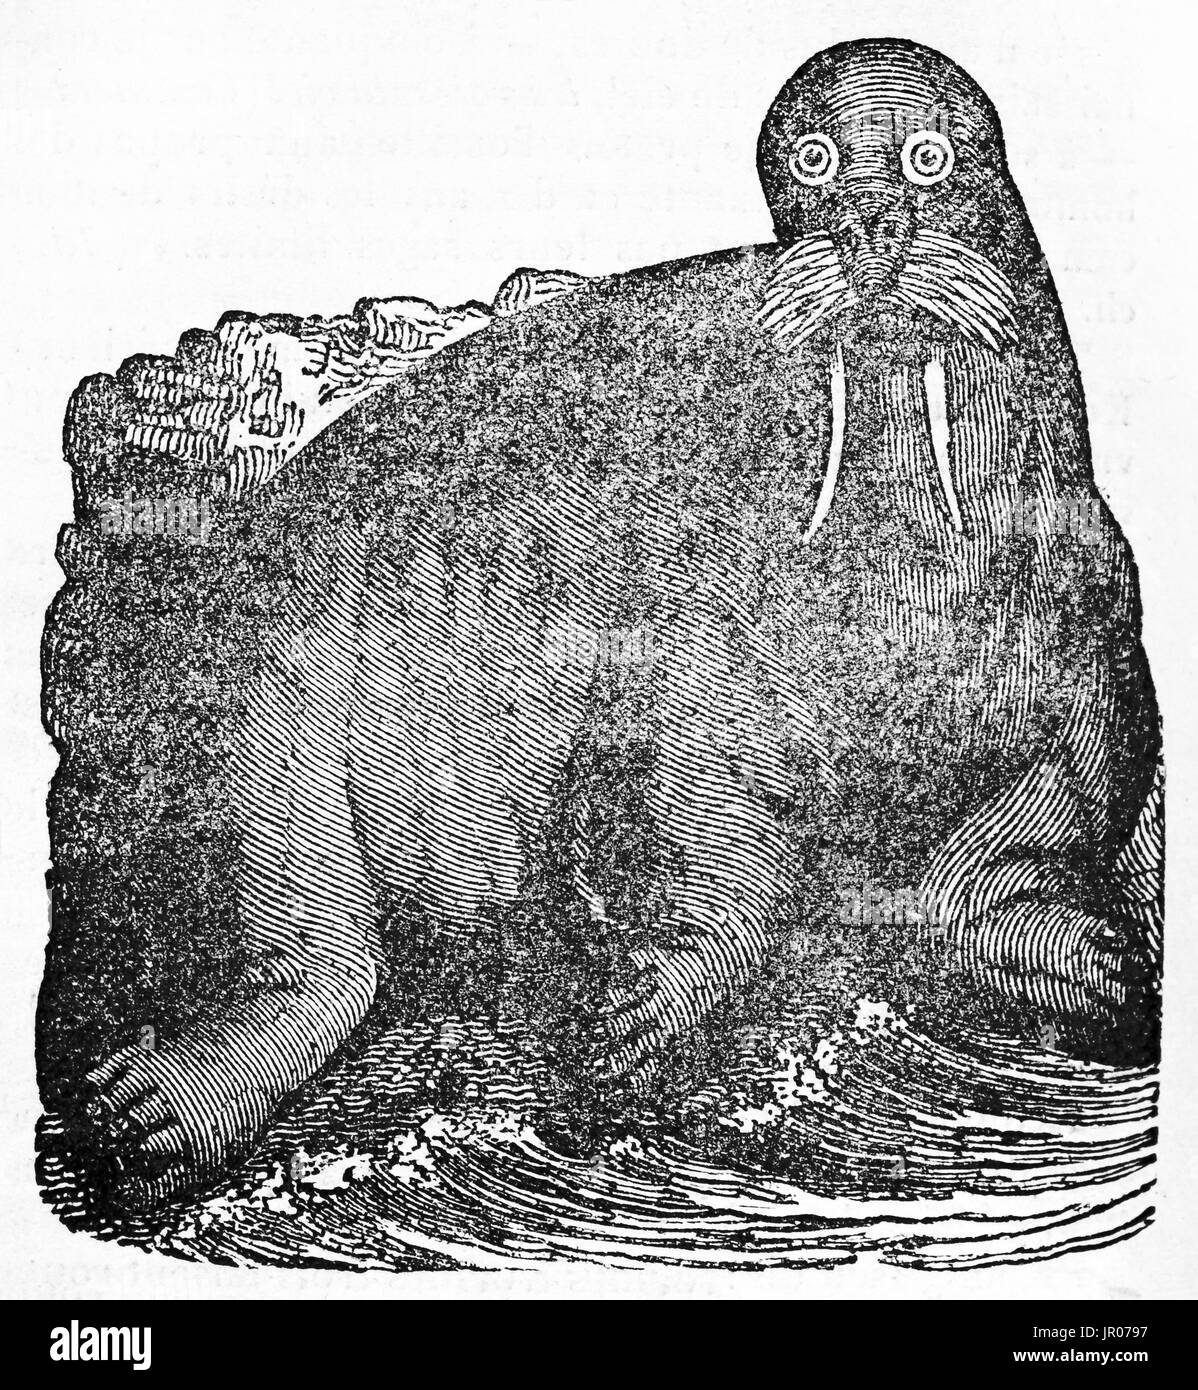 Old illustration of a Walrus (Odobenus rosmarus). By unidentified author, published on Magasin Pittoresque, Paris, 1833. Stock Photo